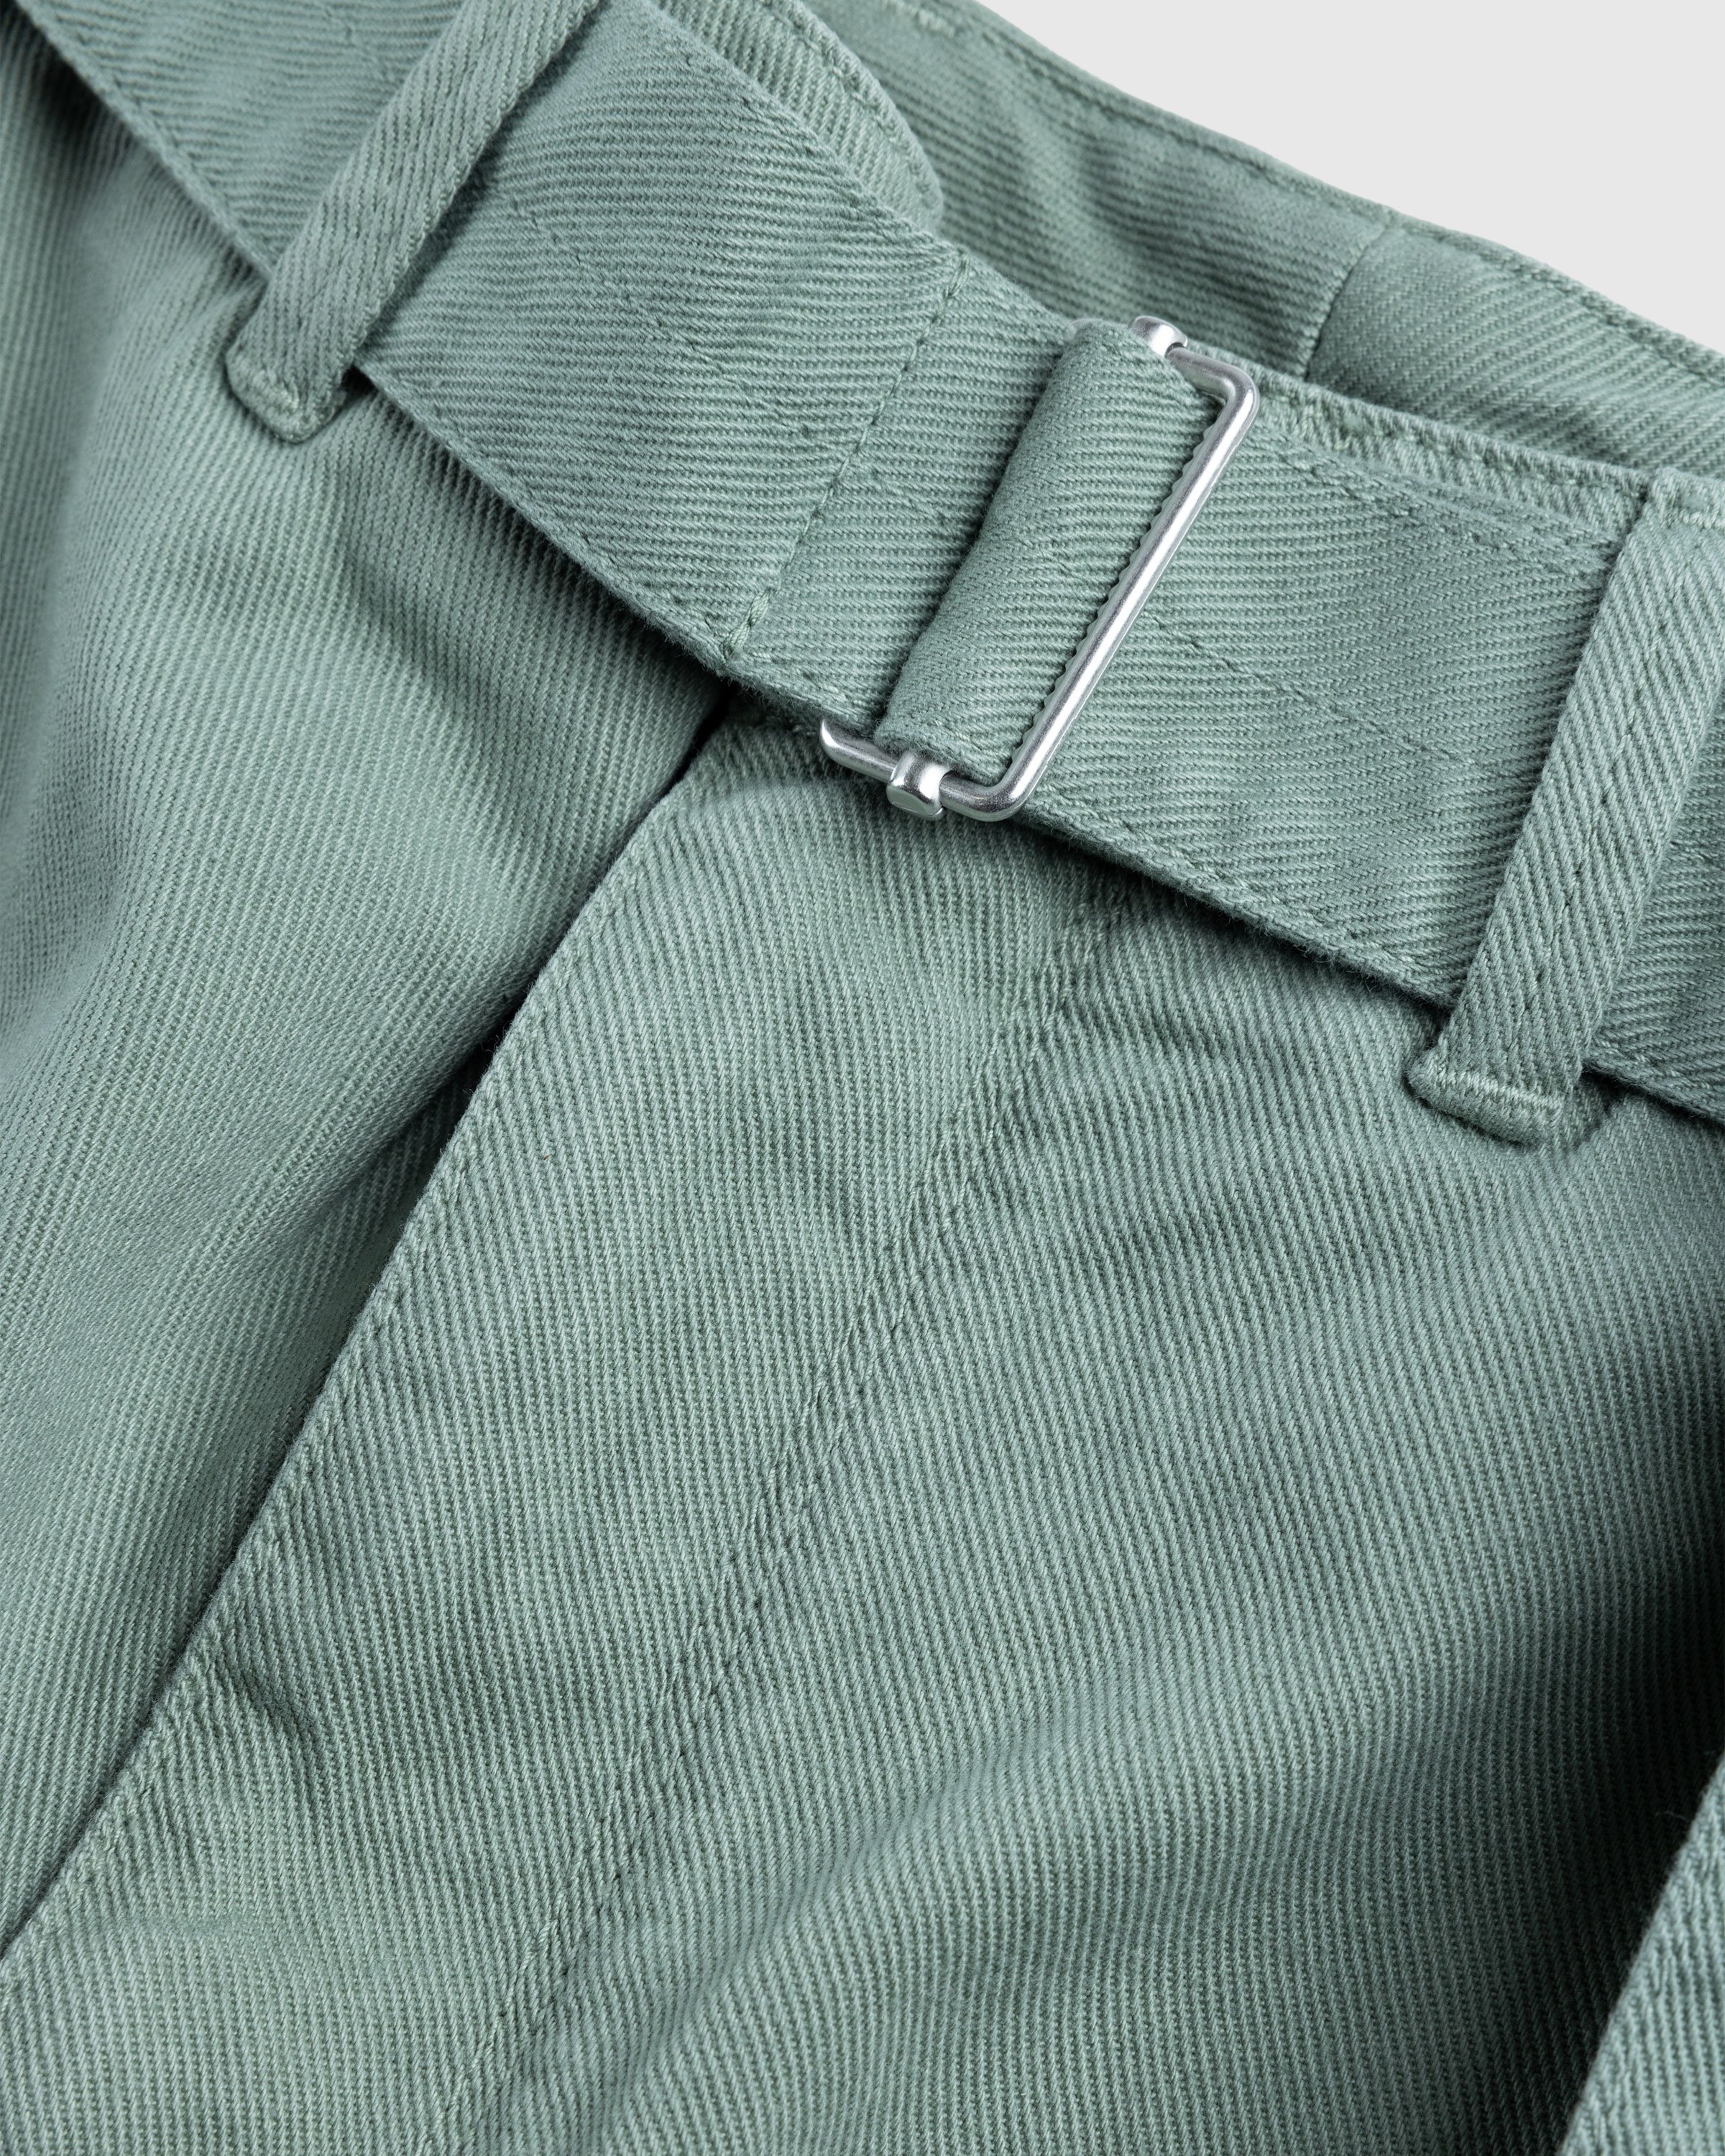 Lemaire - MILITARY PANTS - Clothing - Green - Image 6